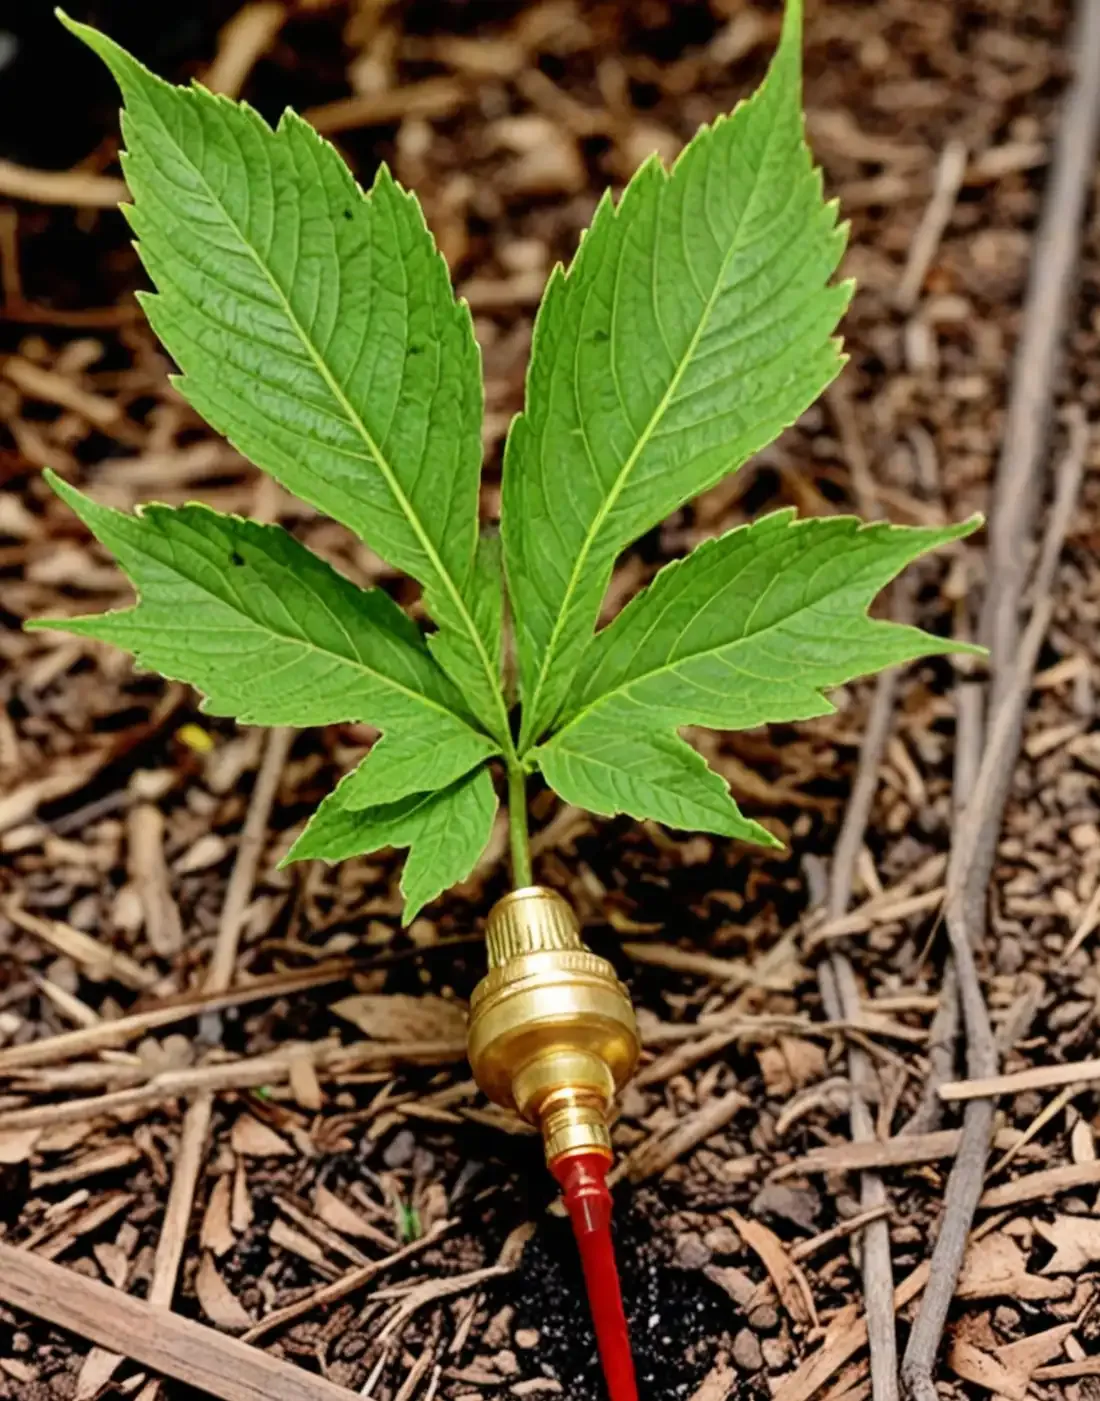 fake photograph of a green leafed plant growing out of a tiny red hose